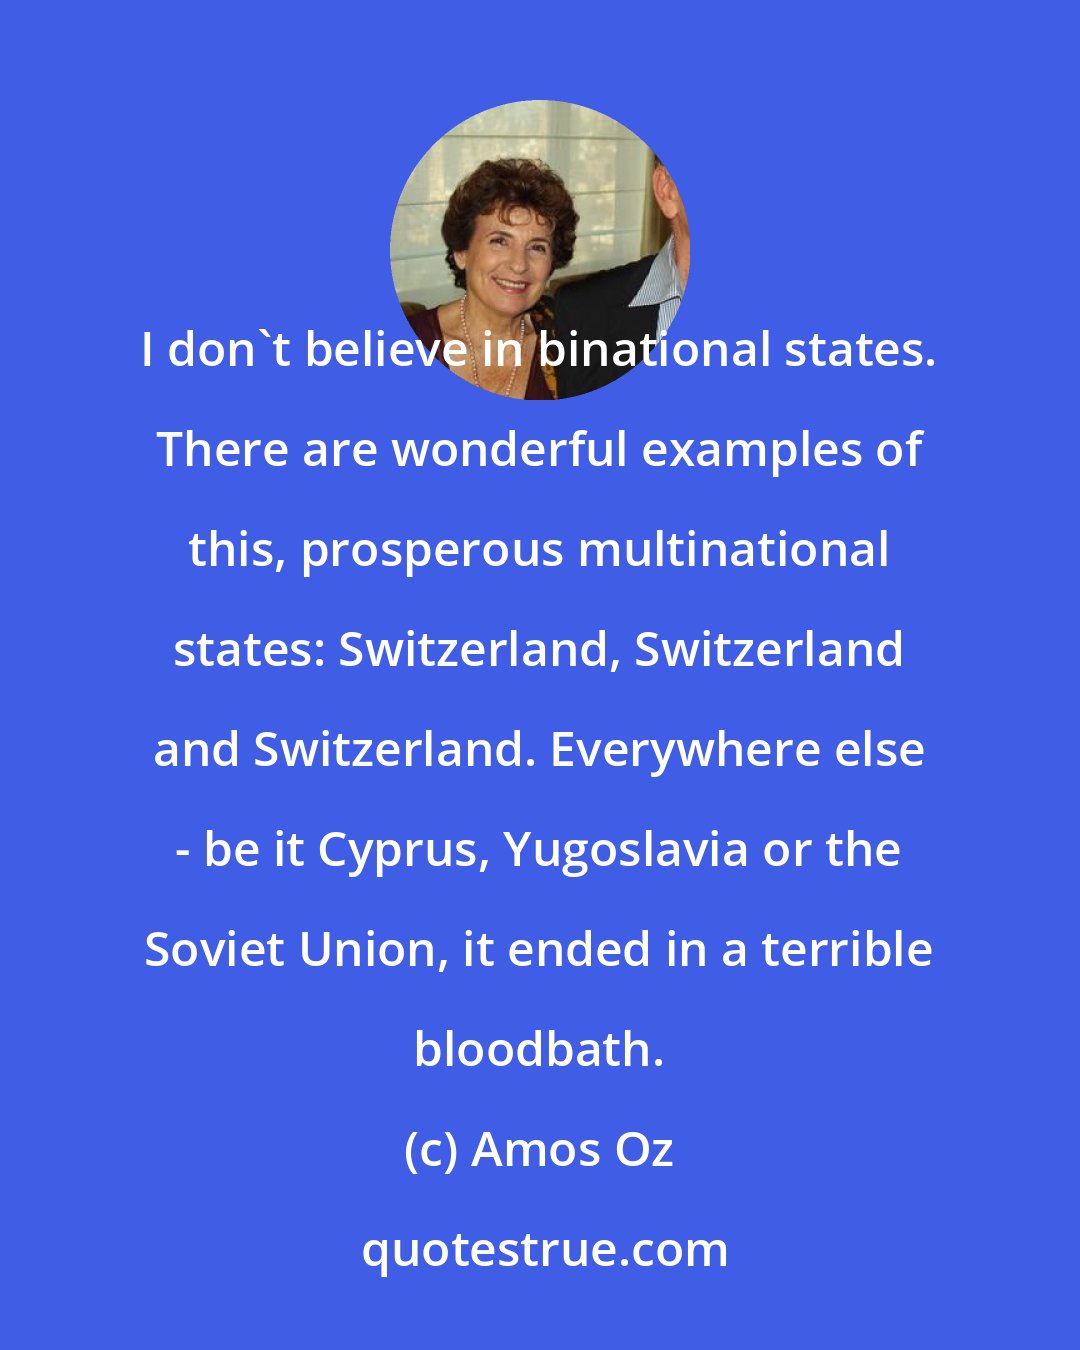 Amos Oz: I don't believe in binational states. There are wonderful examples of this, prosperous multinational states: Switzerland, Switzerland and Switzerland. Everywhere else - be it Cyprus, Yugoslavia or the Soviet Union, it ended in a terrible bloodbath.